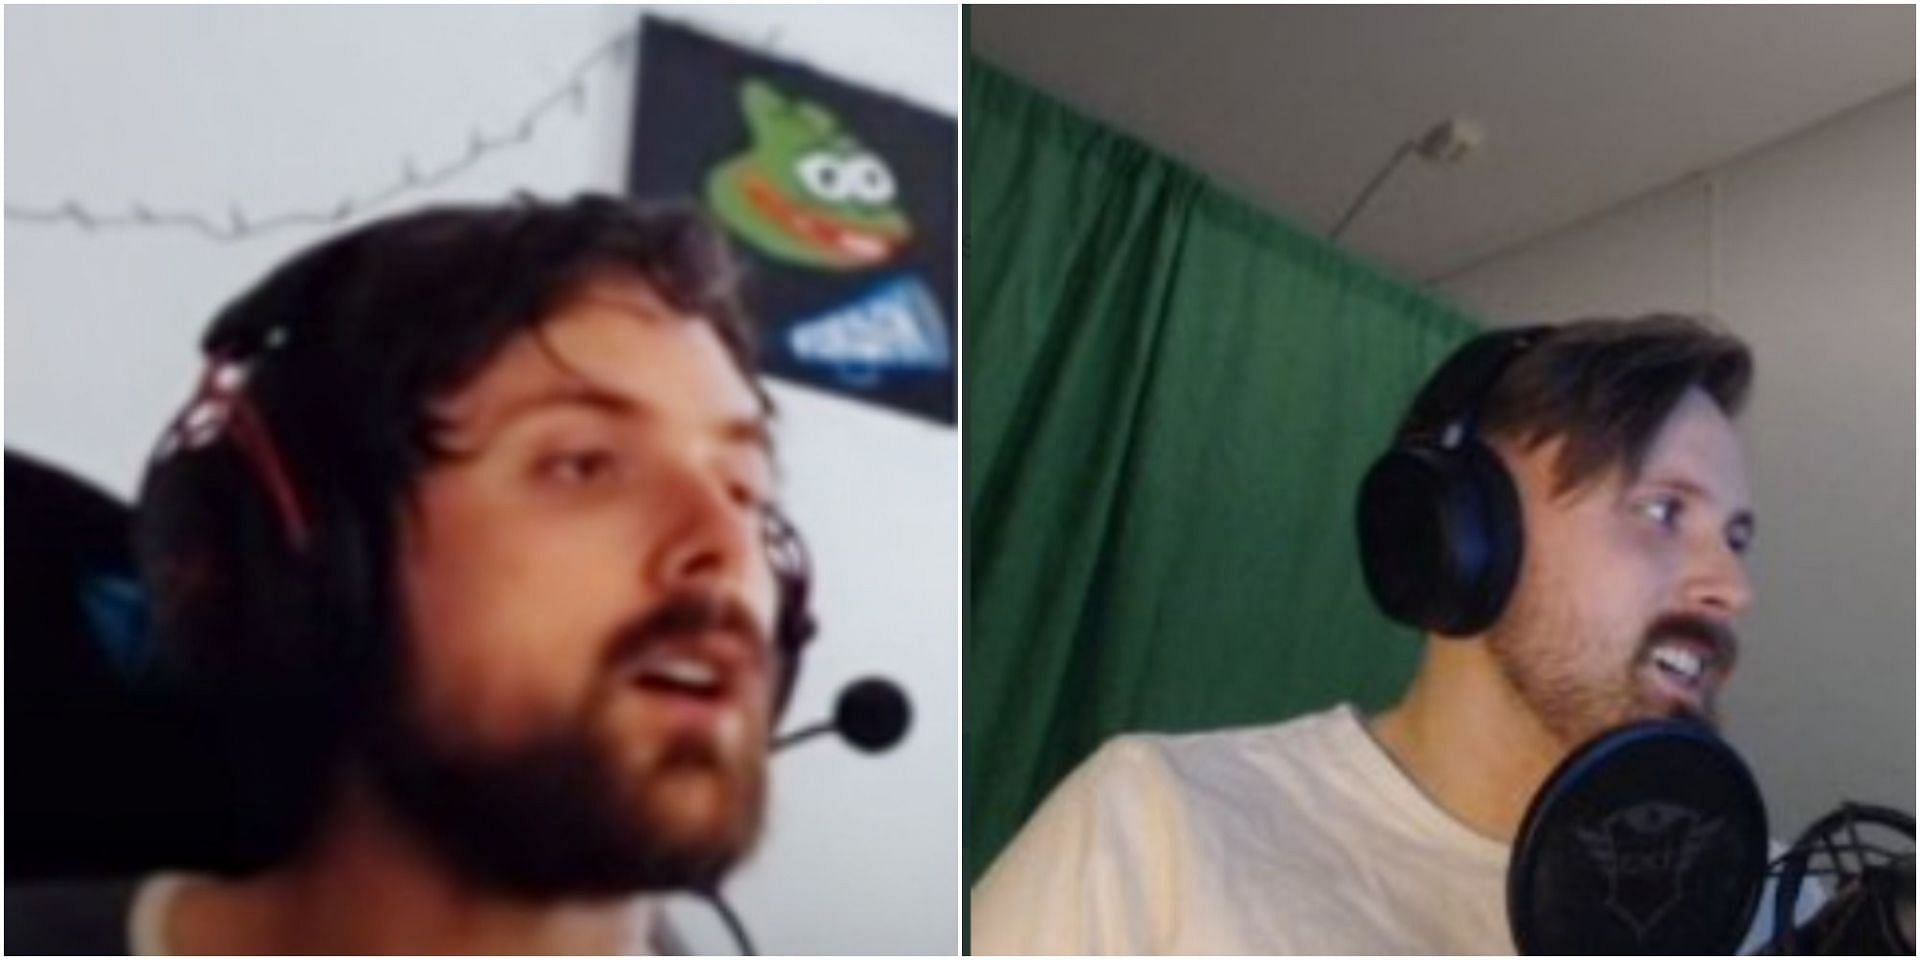 Forsen stunned fans with a new haircut earlier today. (Image via Forsen)